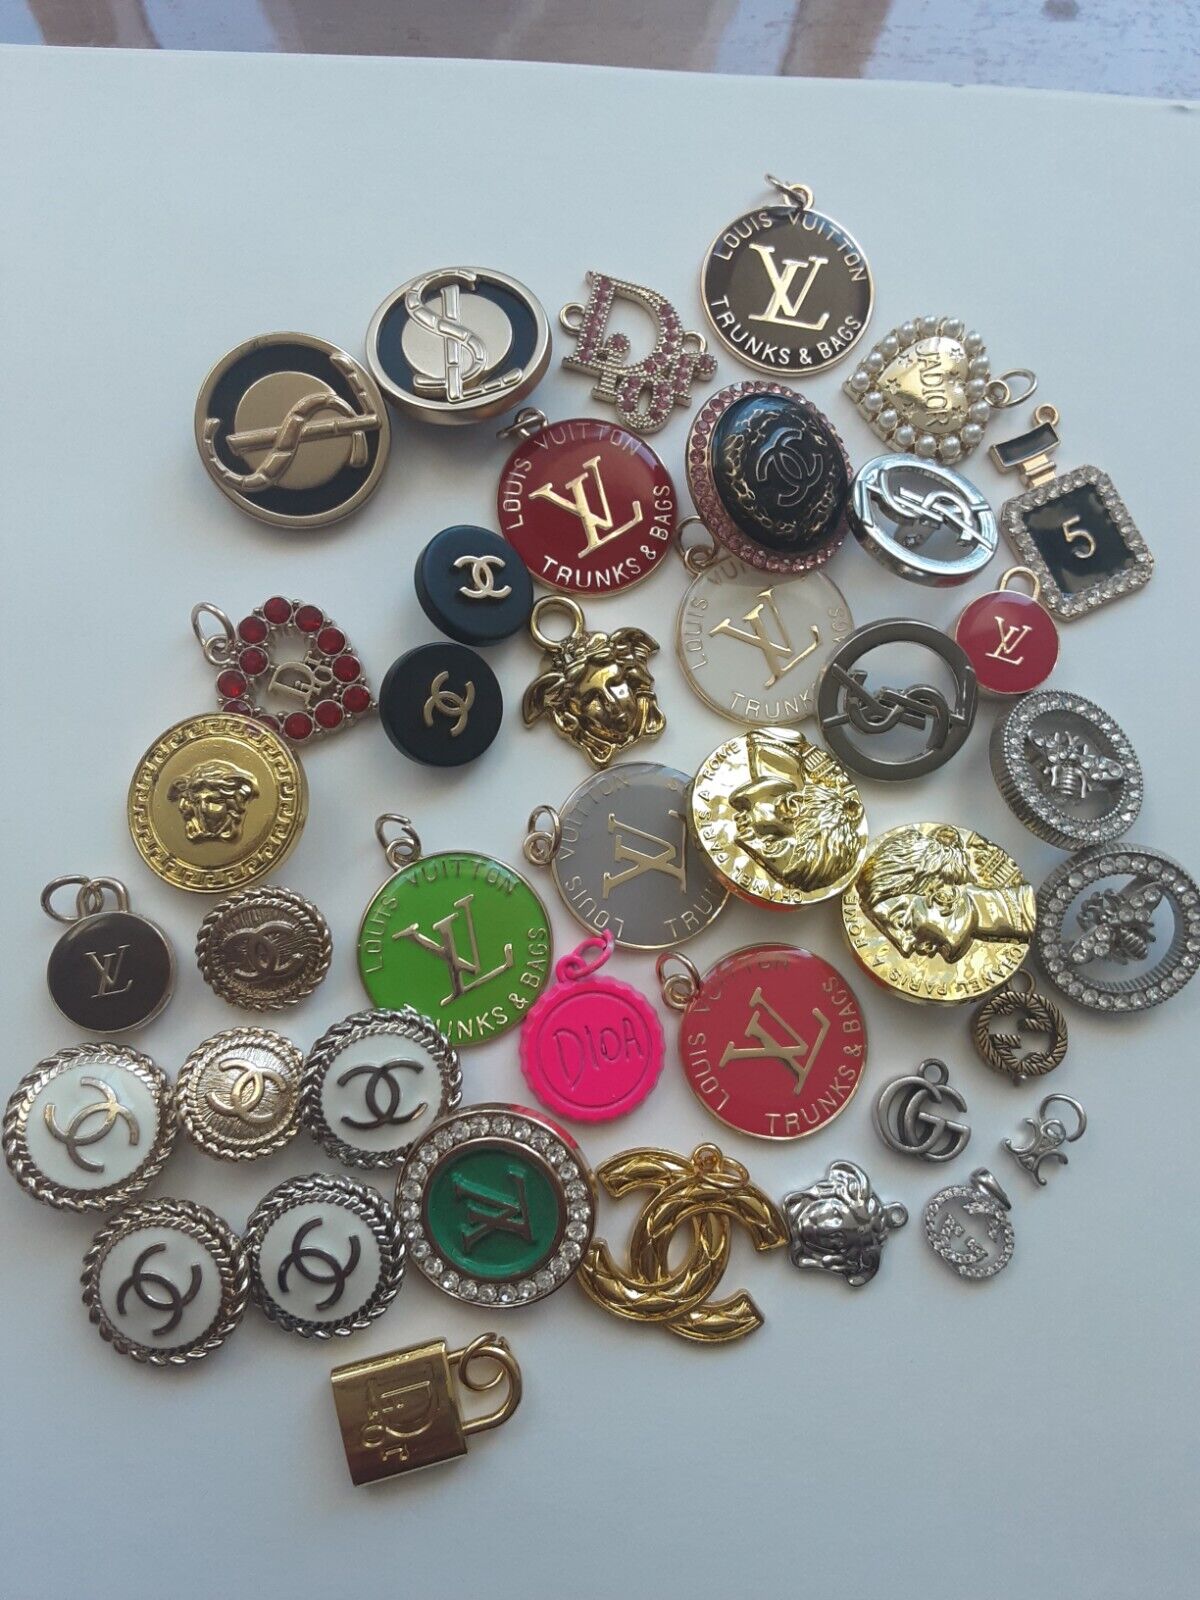 YSL Dior Versace Gucci Celine Zipper Pull buttons mix lot of 42  mix